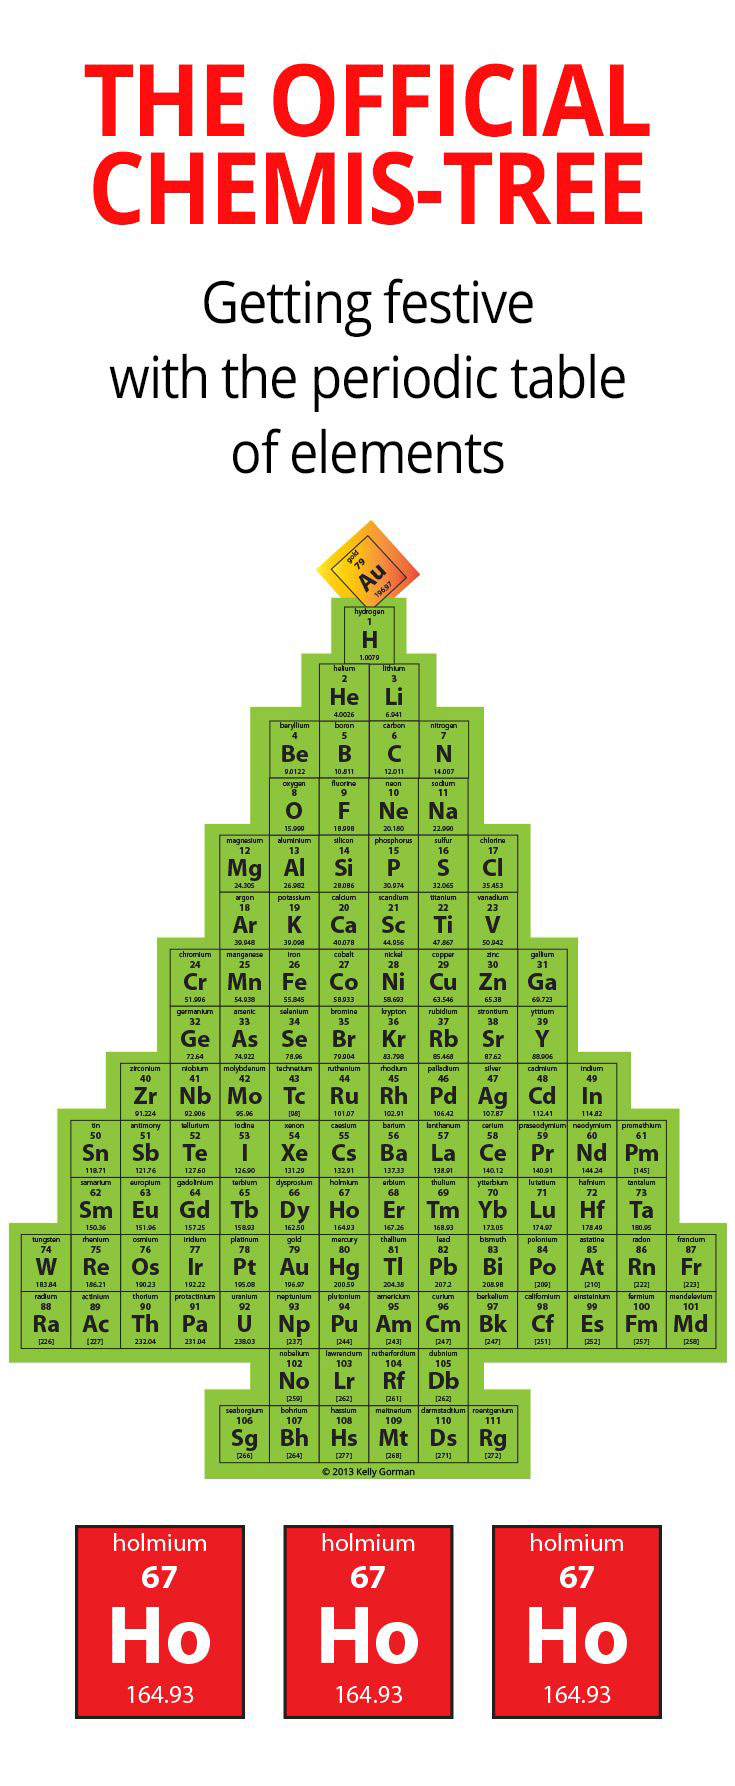 The Official Chemis-Tree